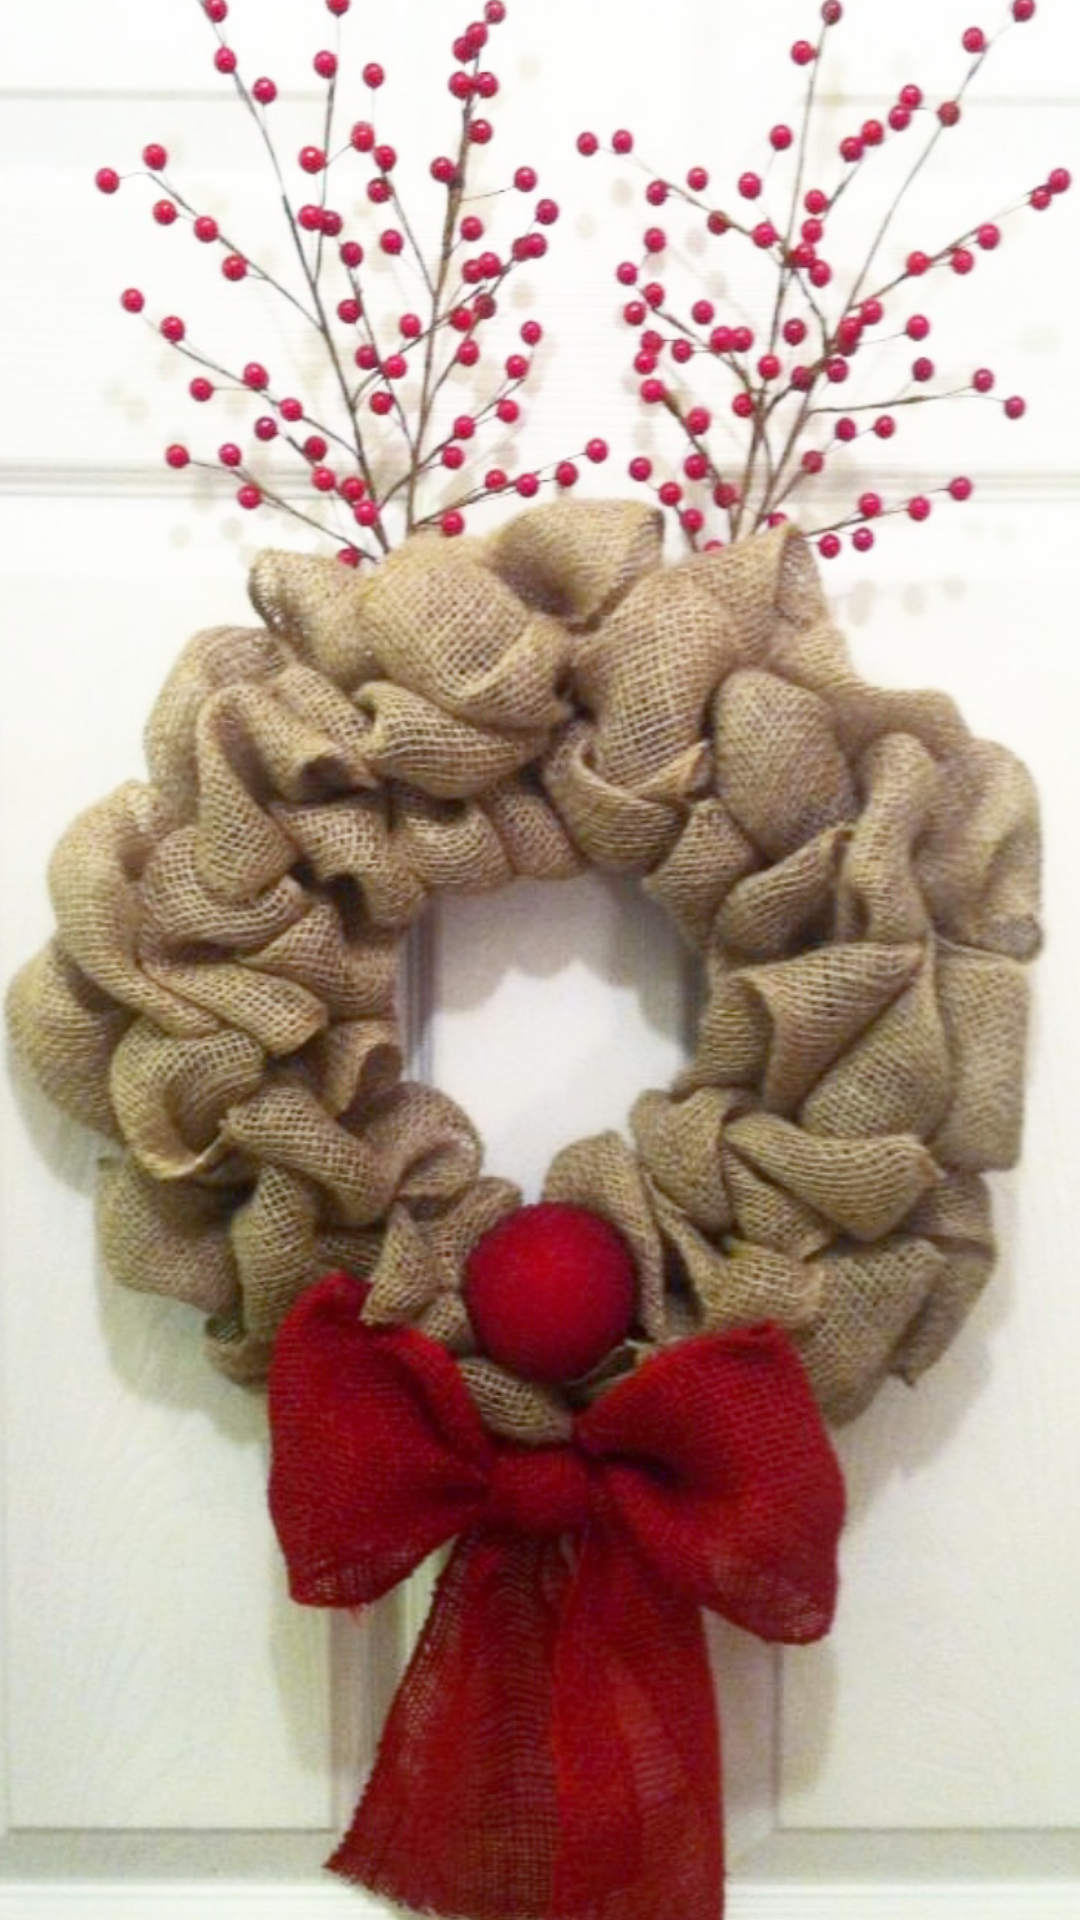 A Rudolph Burlap Wreath plant nite project by Yaymaker